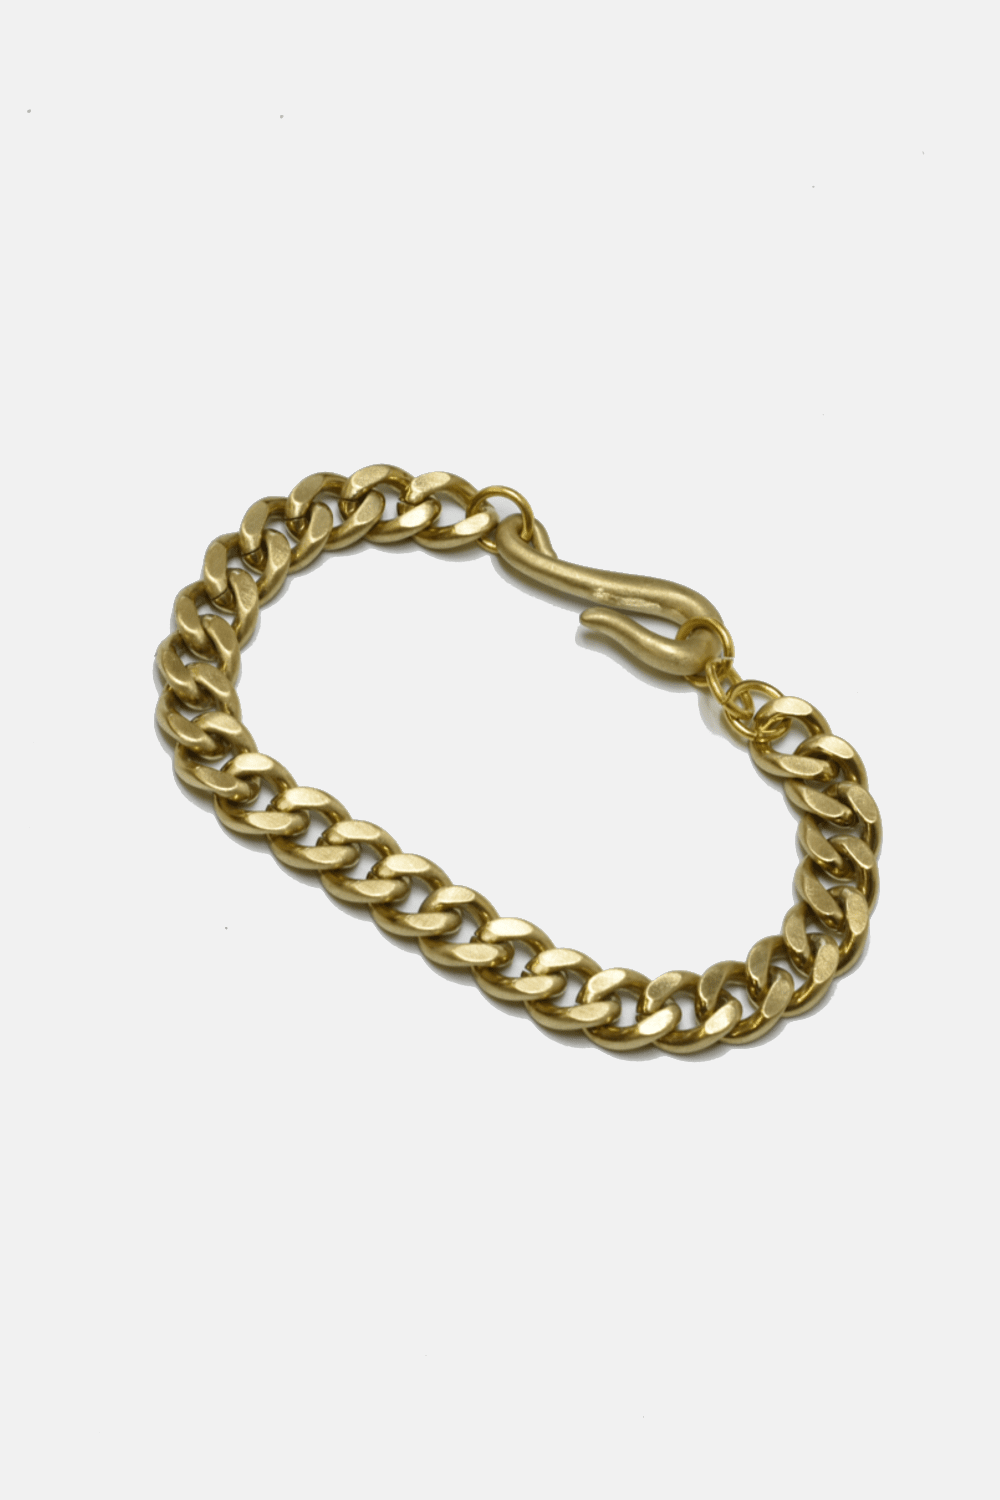 Curb Chain with Fish Hook -Steel or Brass Bracelets + Anklets